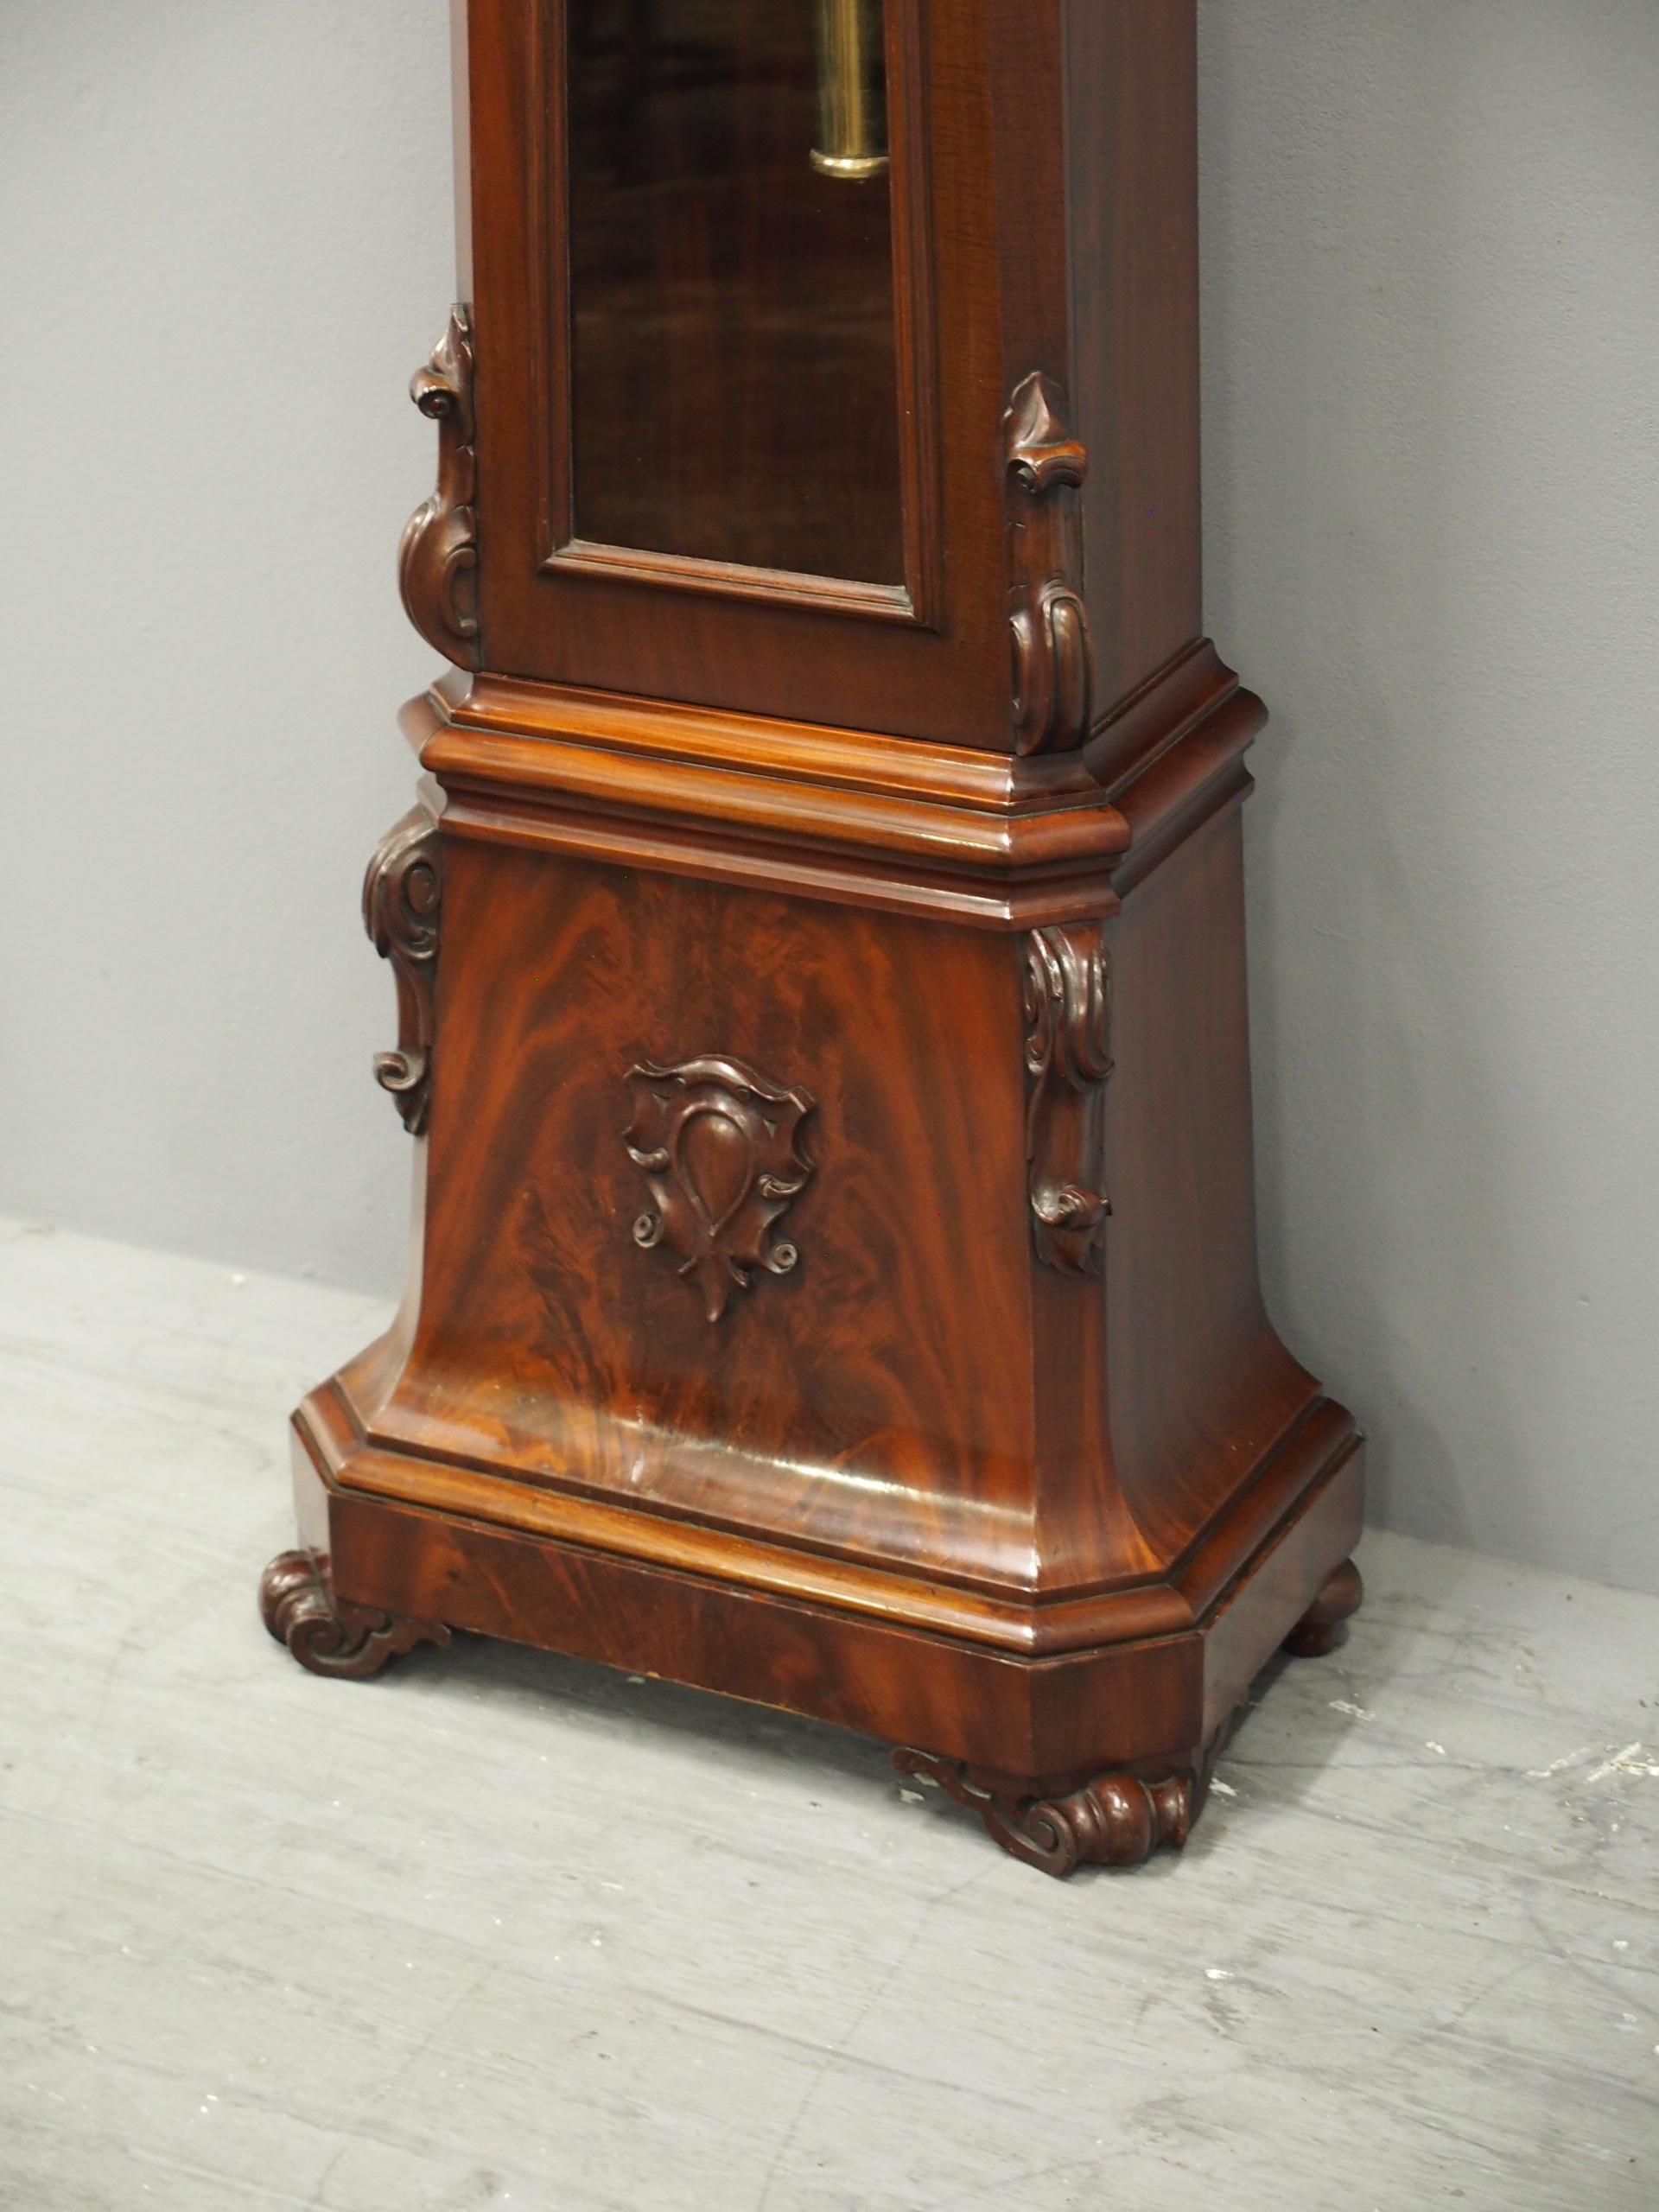 Mid Victorian mahogany dome-top glass fronted grandfather clock by W C Shaw, 64 Argyle Street, Glasgow, circa 1860. With carved foliate and c-scroll designs to the drum head and a brass bezel containing a silvered face with Roman numerals. It has a